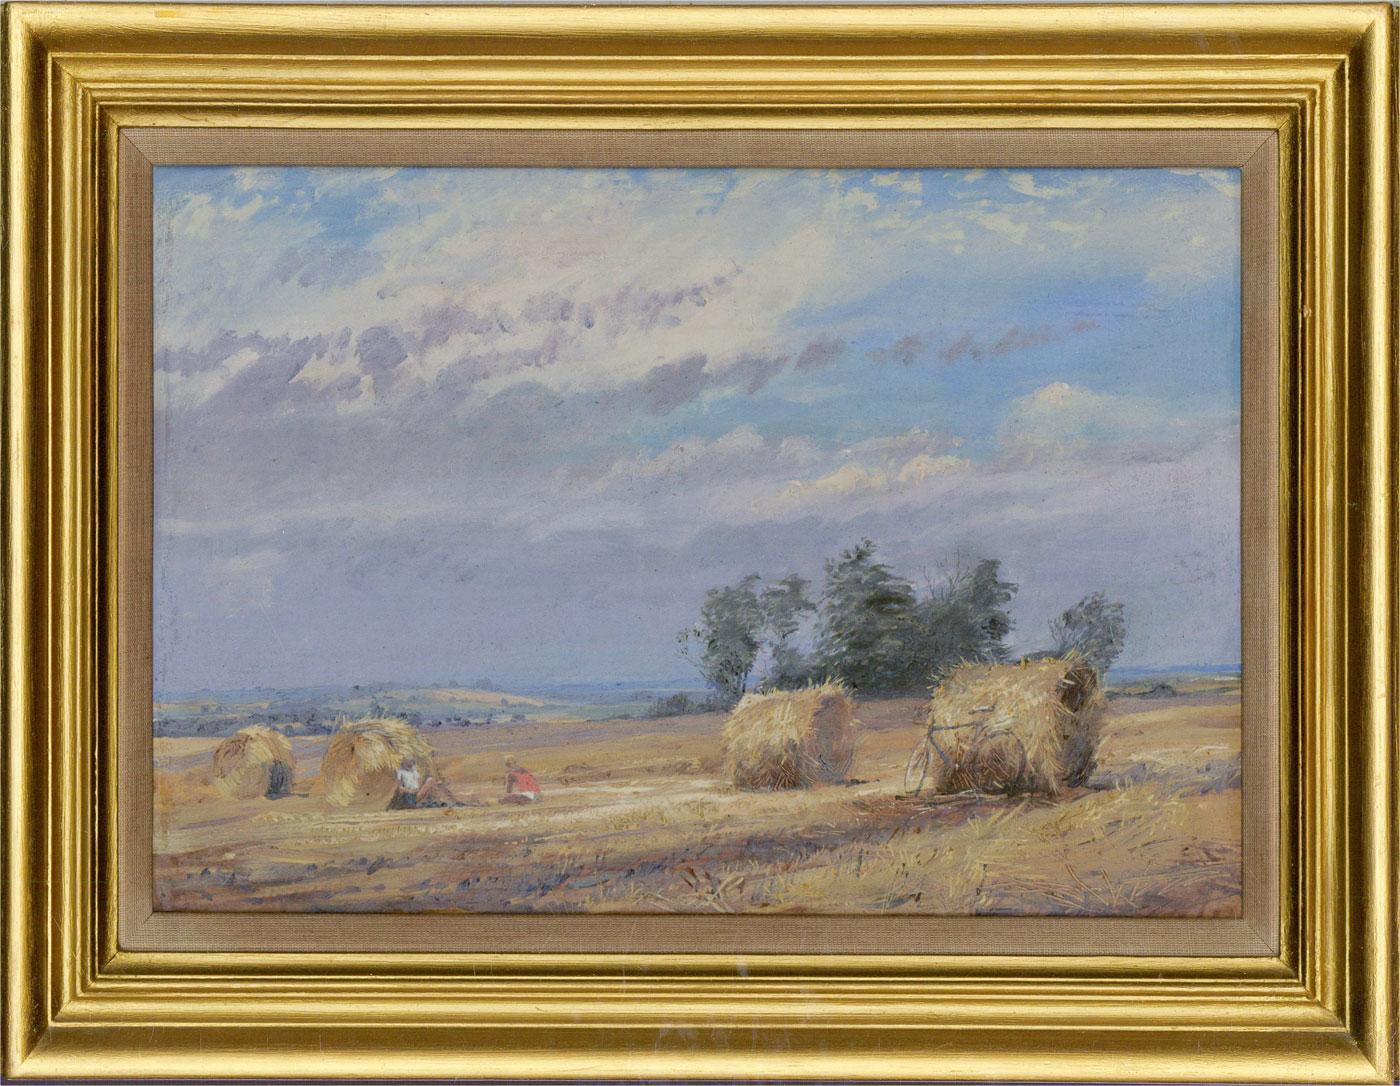 A view across a golden hayfield near Tadmarton in Oxfordshire. Two figures rest among the hay bales while a bike sits idle to the right of the composition. Presented in a gold-painted wooden frame and a linen slip. Unsigned. Inscribed to the verso